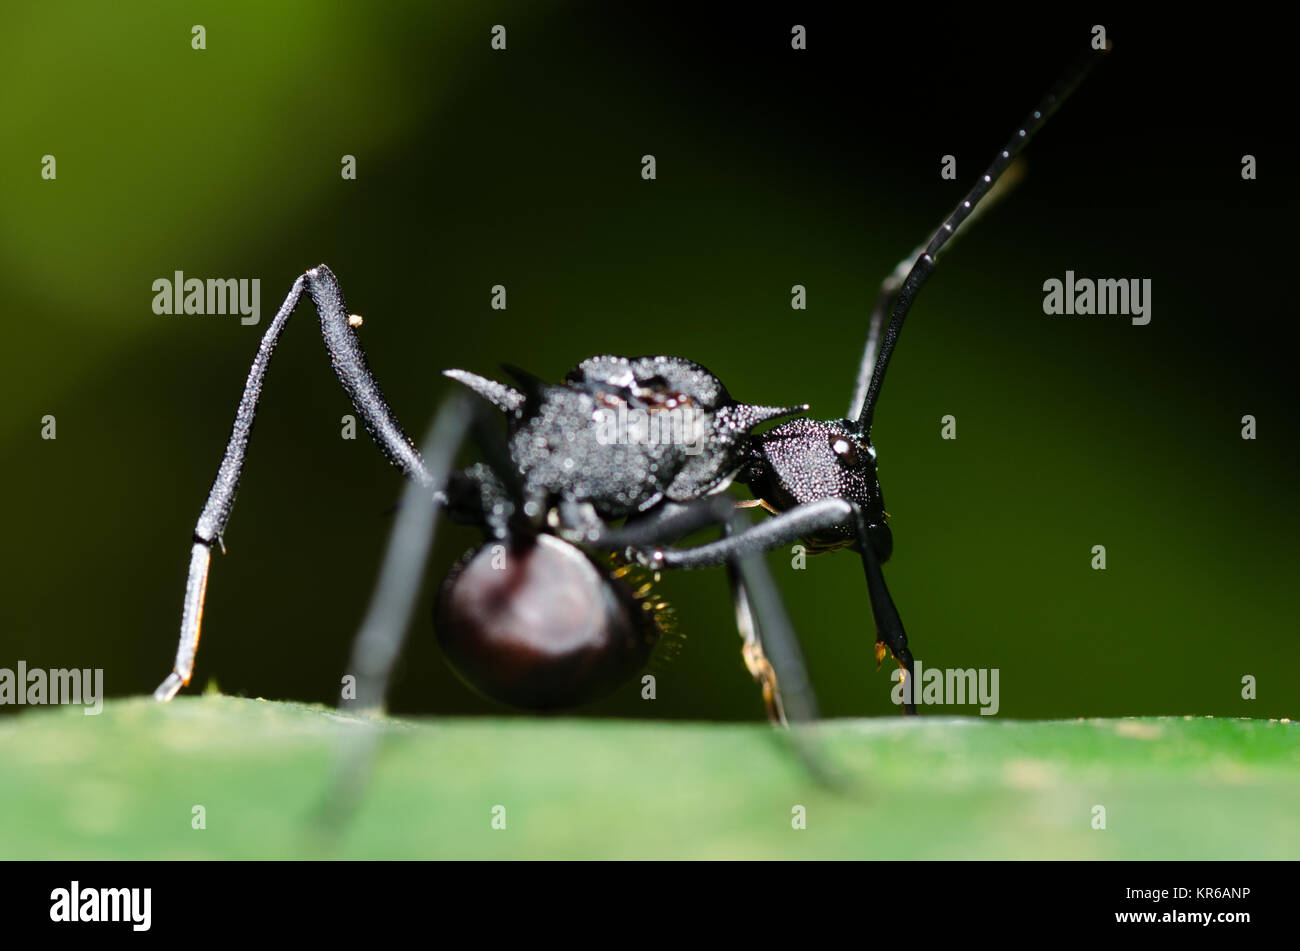 close up of black garden ant (Lasius niger) on a leaf looking at the camera Stock Photo